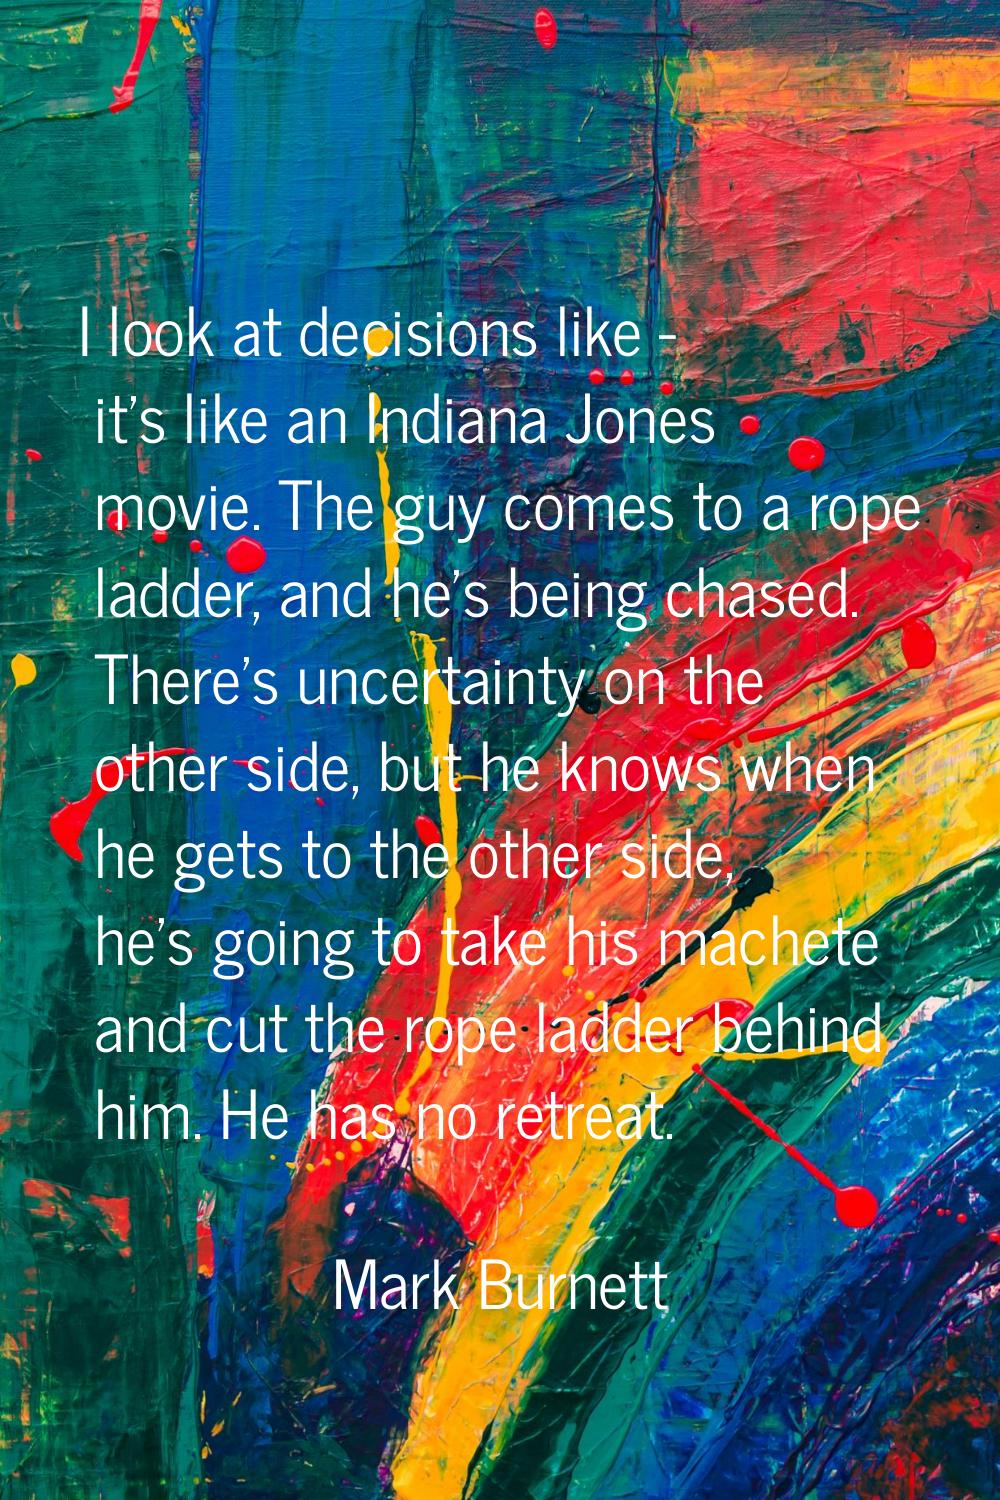 I look at decisions like - it's like an Indiana Jones movie. The guy comes to a rope ladder, and he